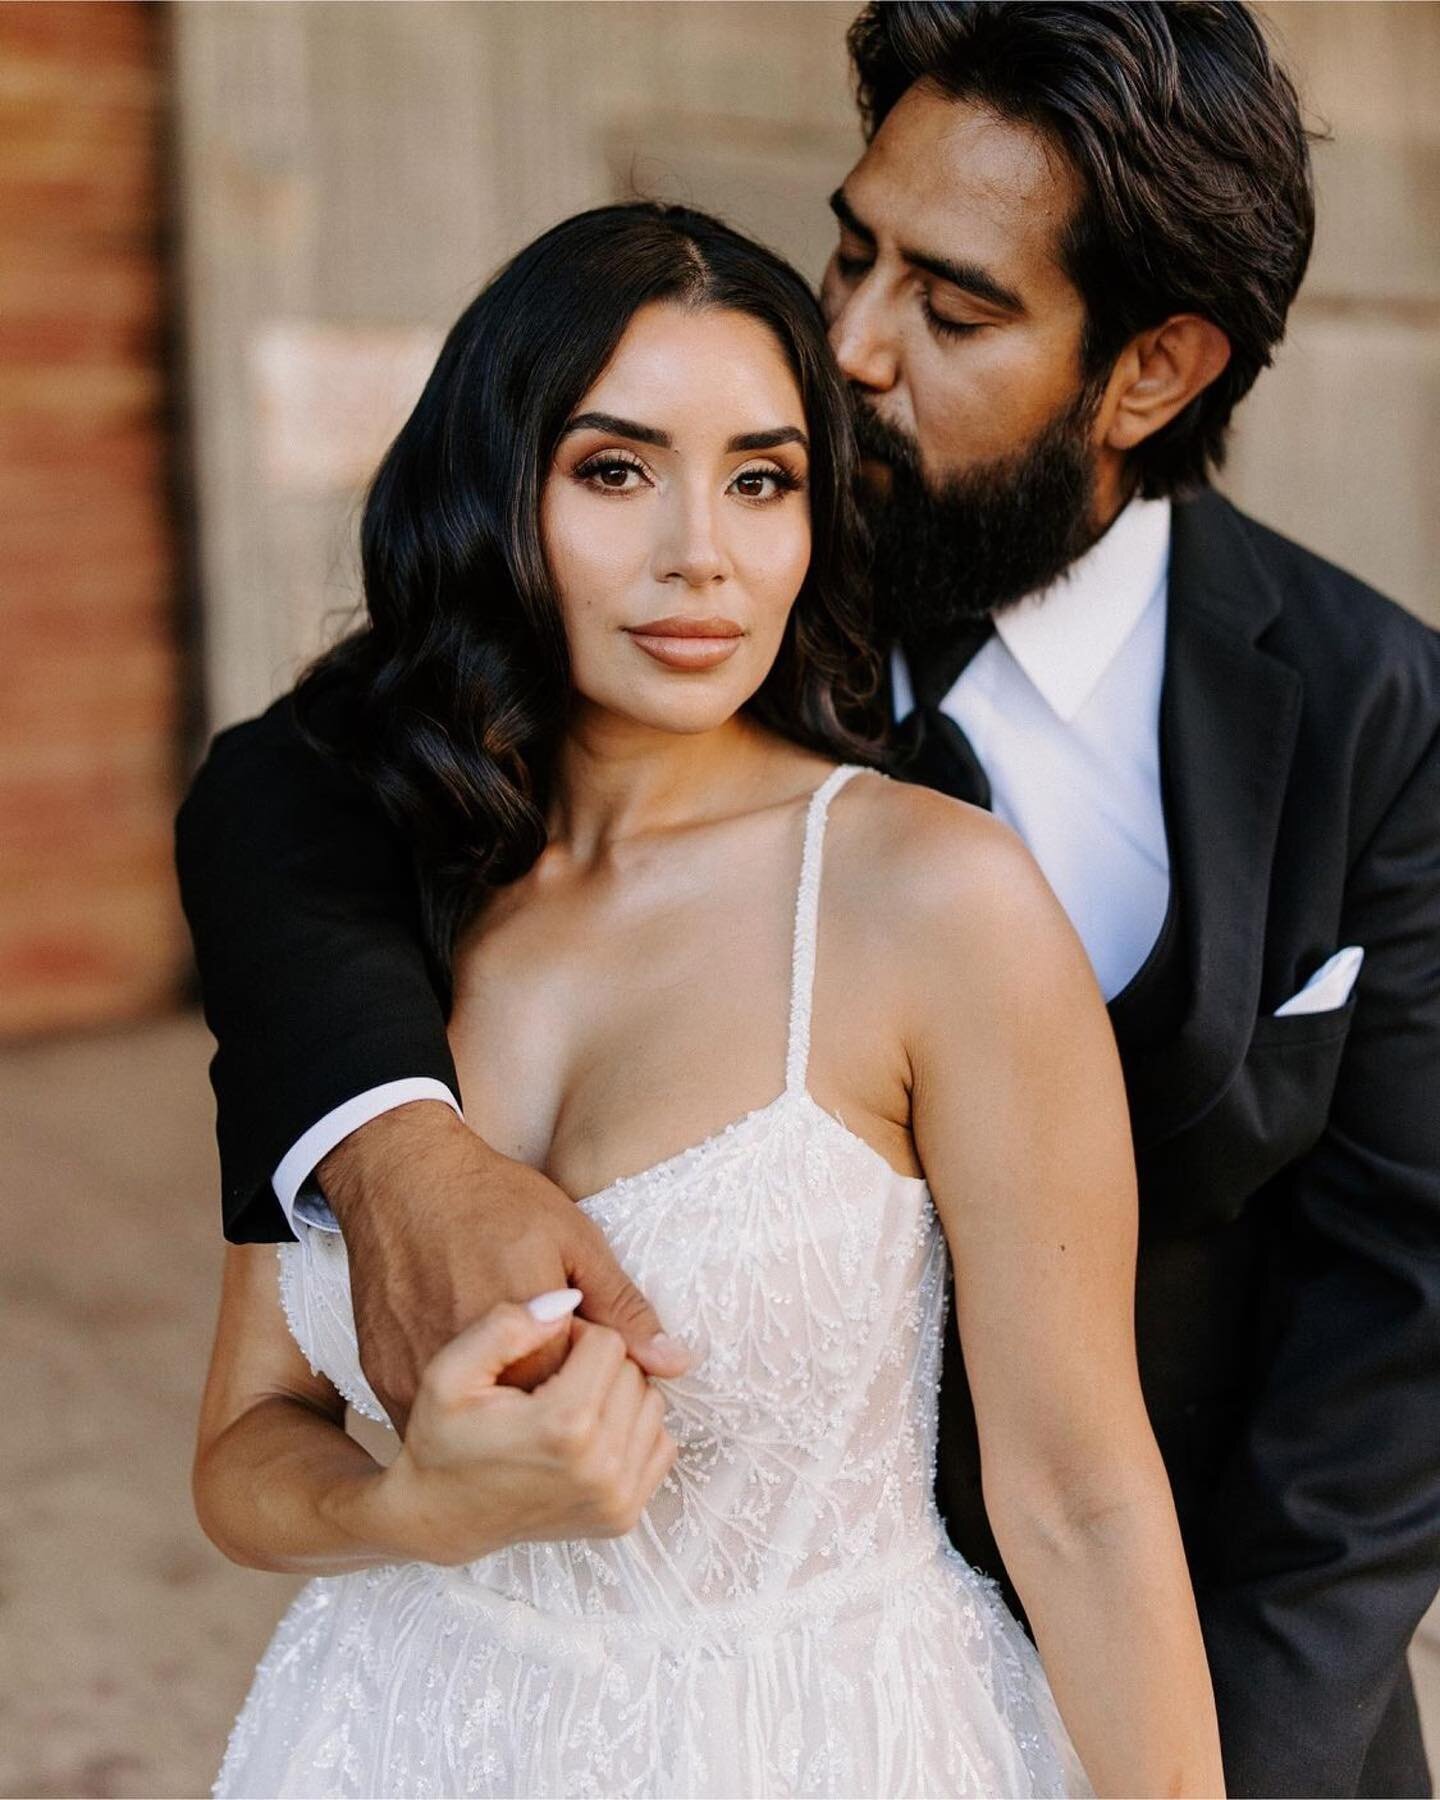 So excited to be a part of this photo shoot. Bride models is wearing our style Fontana✨

Thank you @roberto.chavez.photography and everyone else involved😘😘
・・・
Yesterday I hosted my third and best workshop yet 🙌🏽 Tony + Esmeralda brought the 🔥 a